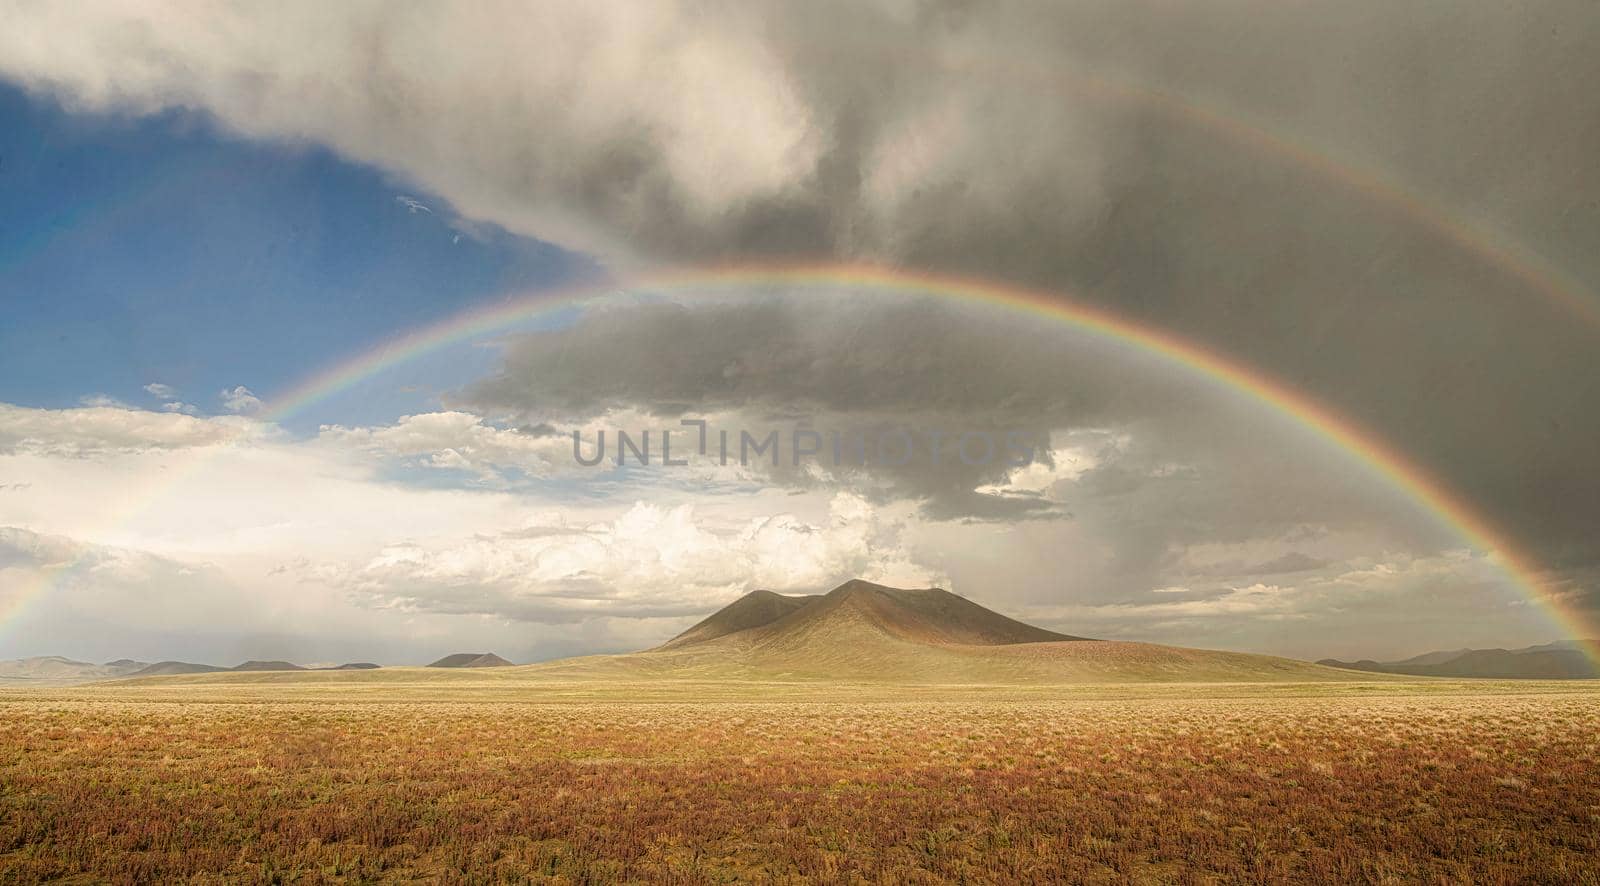 Rainbow Over Eash Chair Crater by lisaldw